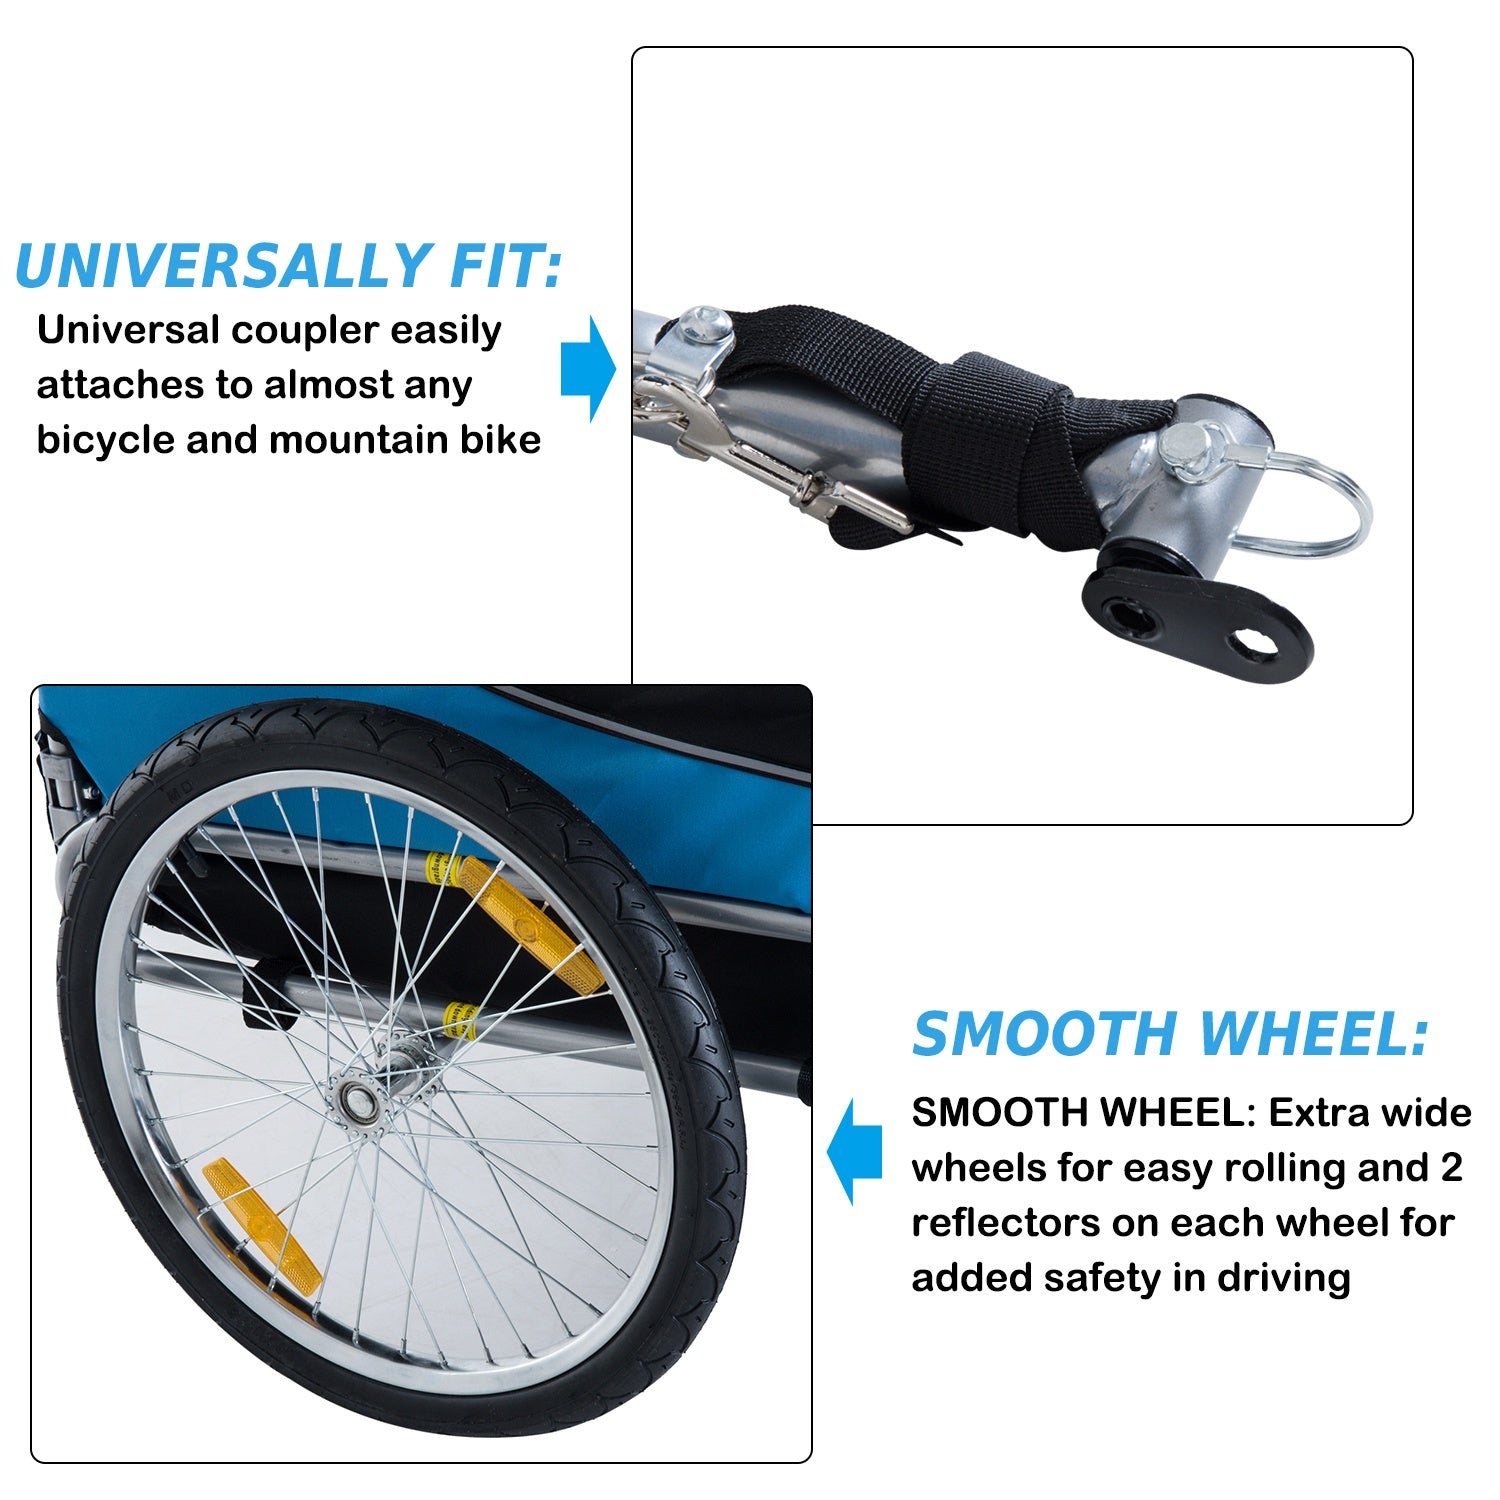 Folding Bicycle Pet Trailer W/Removable Cover-Blue